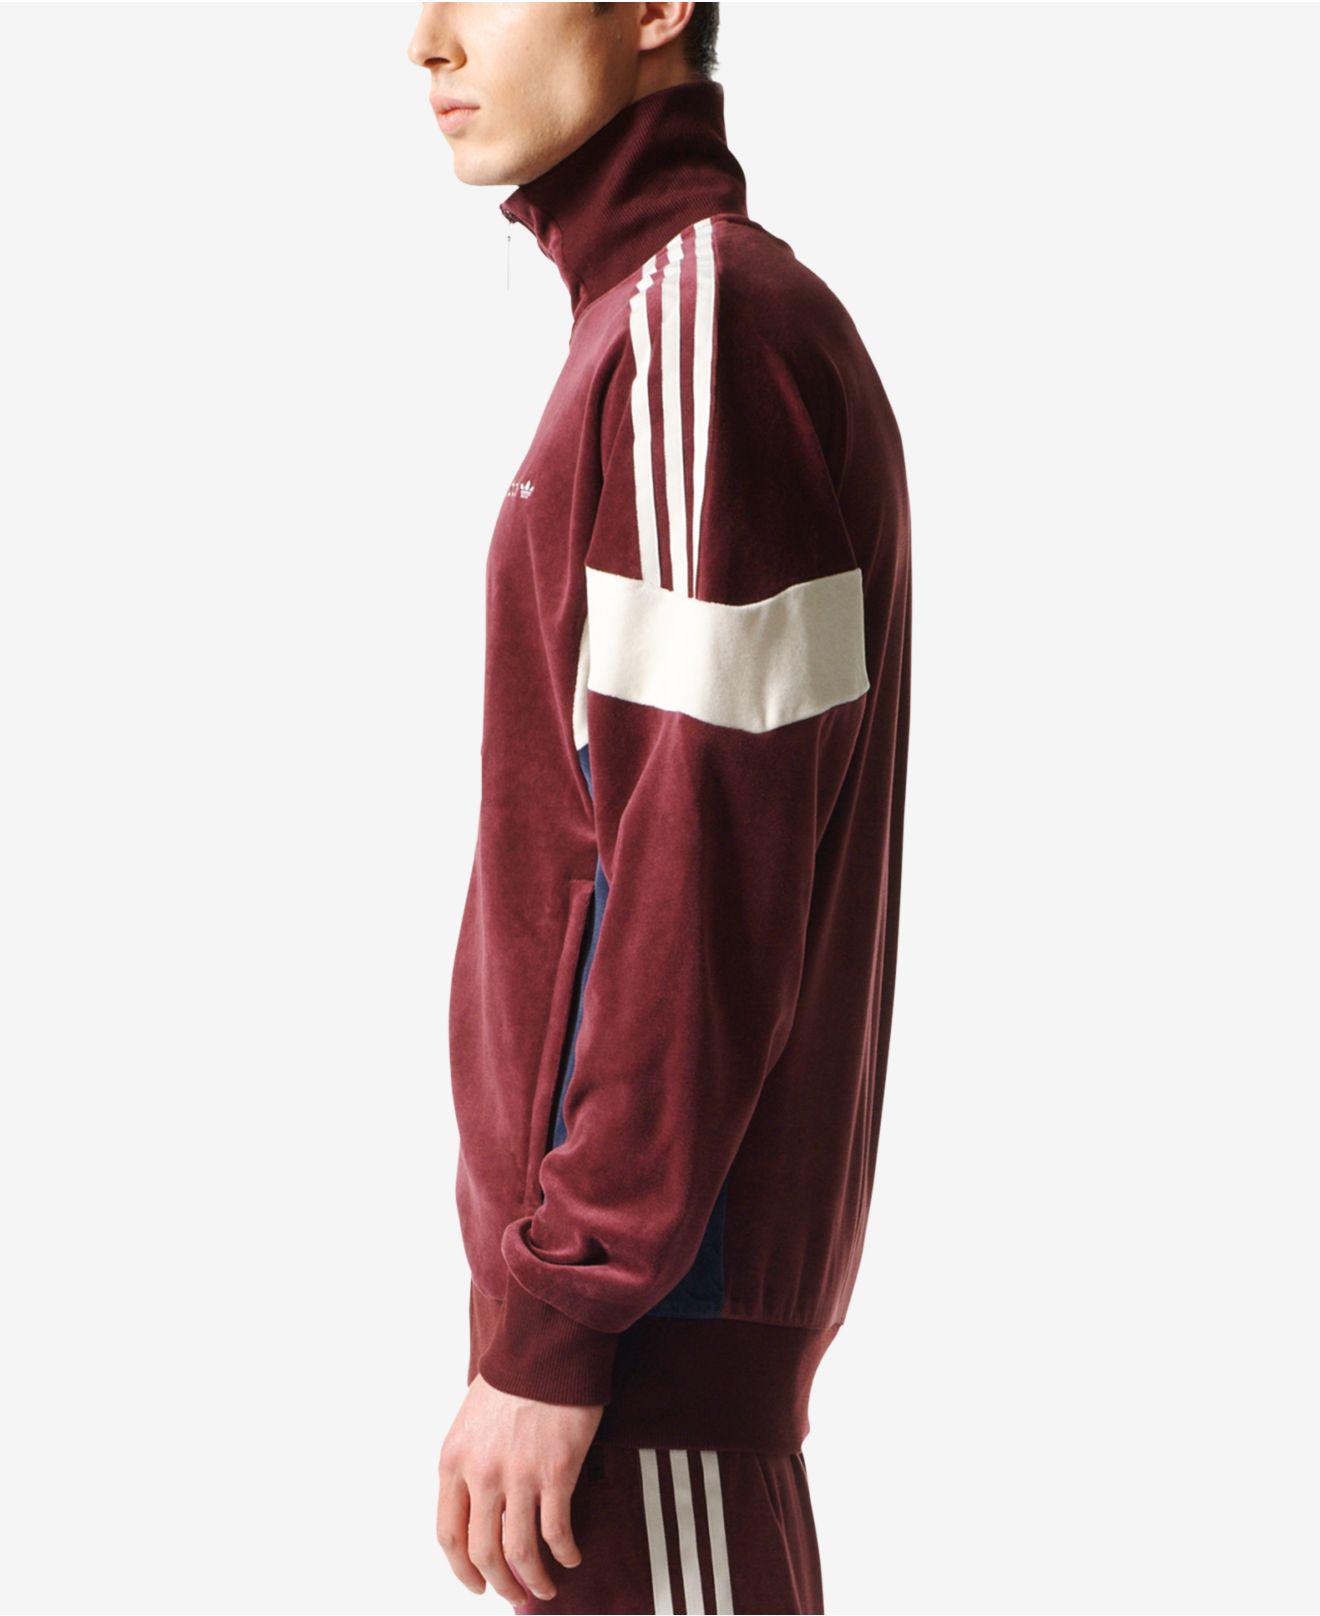 adidas Cotton Clr84 Velour Track Jacket In Red Bs4669 for Men - Lyst